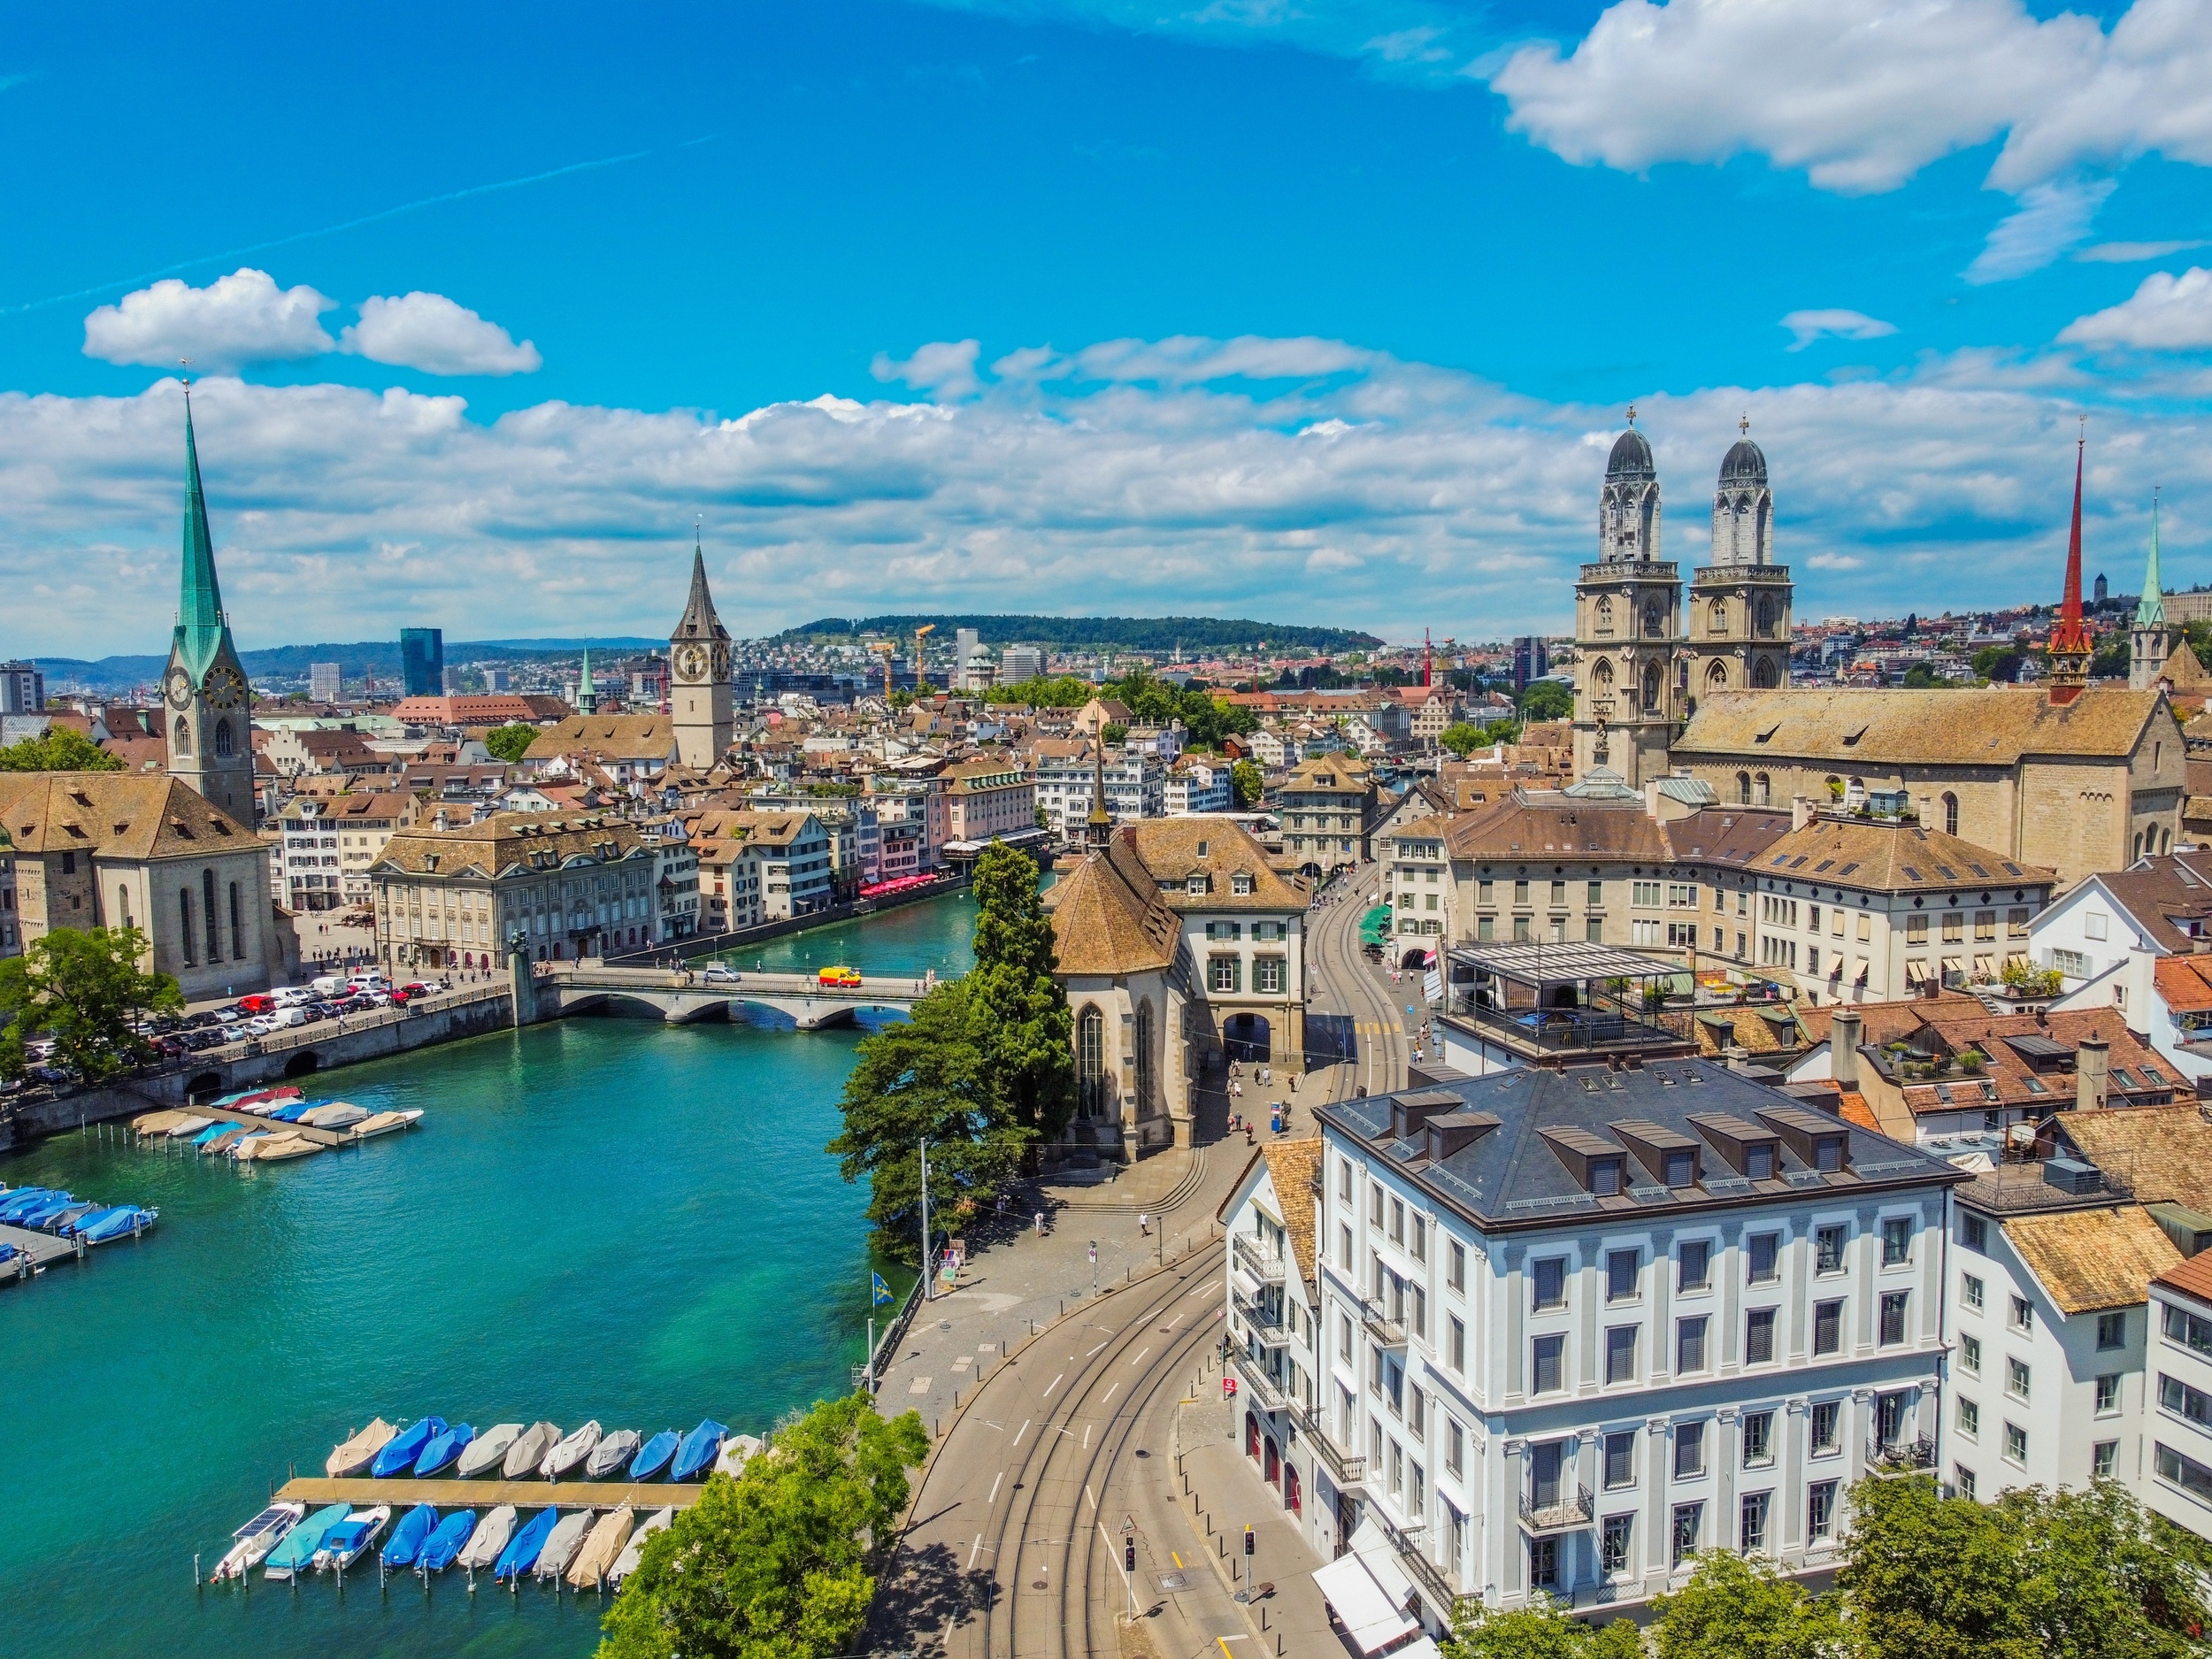 <p>Zurich might not produce any cheese (farms in the countryside and smaller villages are where the Swiss do that), but it is home to some of the best fondue restaurants in Europe. Make sure to make a reservation, as the Swiss and visitors will fill up tables quickly!</p><p><a href='https://www.msn.com/en-us/community/channel/vid-cj9pqbr0vn9in2b6ddcd8sfgpfq6x6utp44fssrv6mc2gtybw0us'>Follow us on MSN to see more of our exclusive lifestyle content.</a></p>